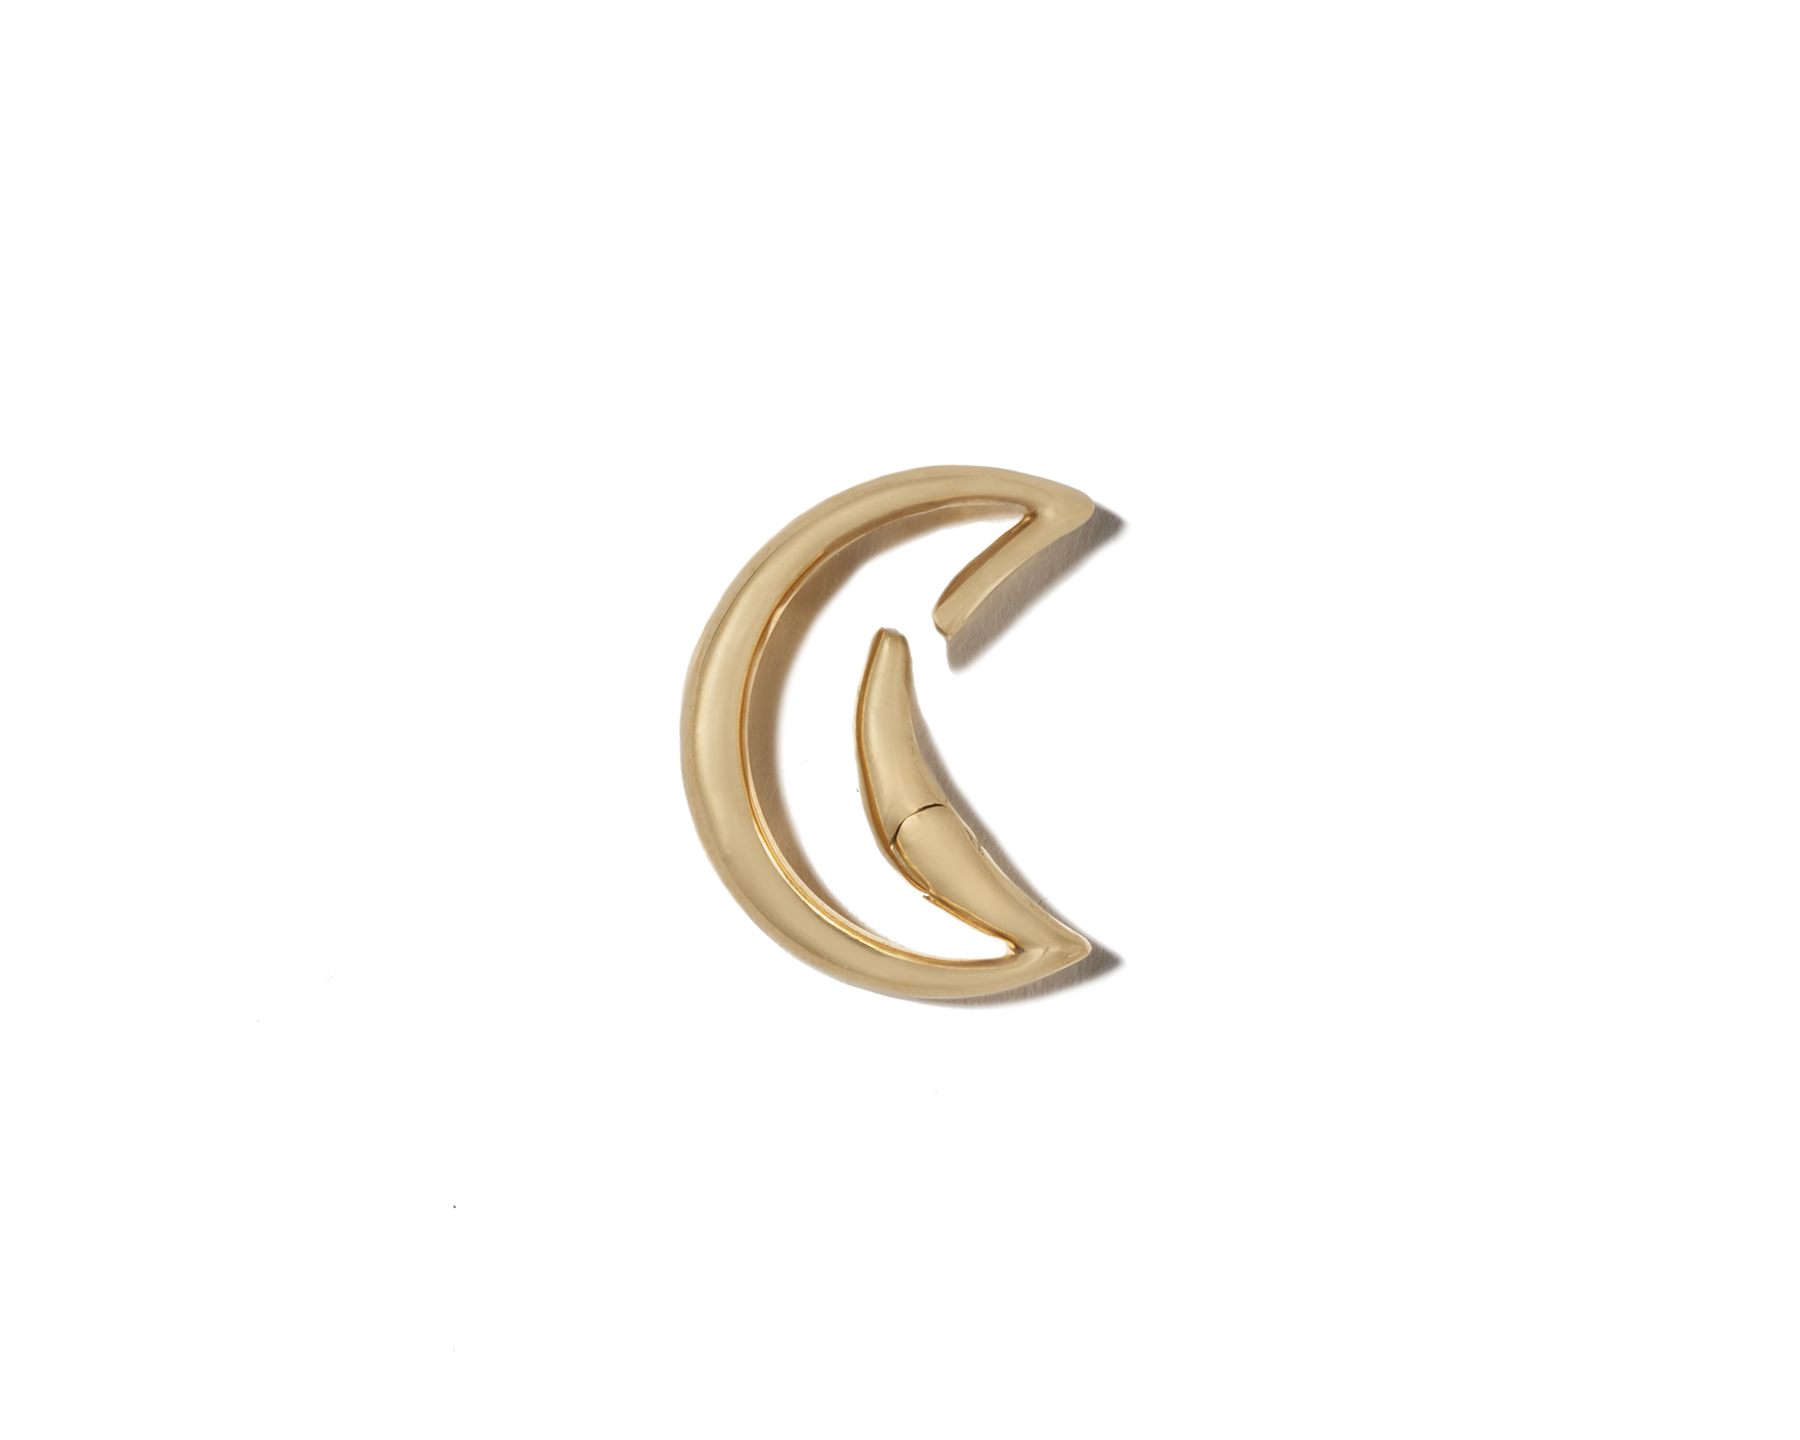 Gold moon charm with open clasp